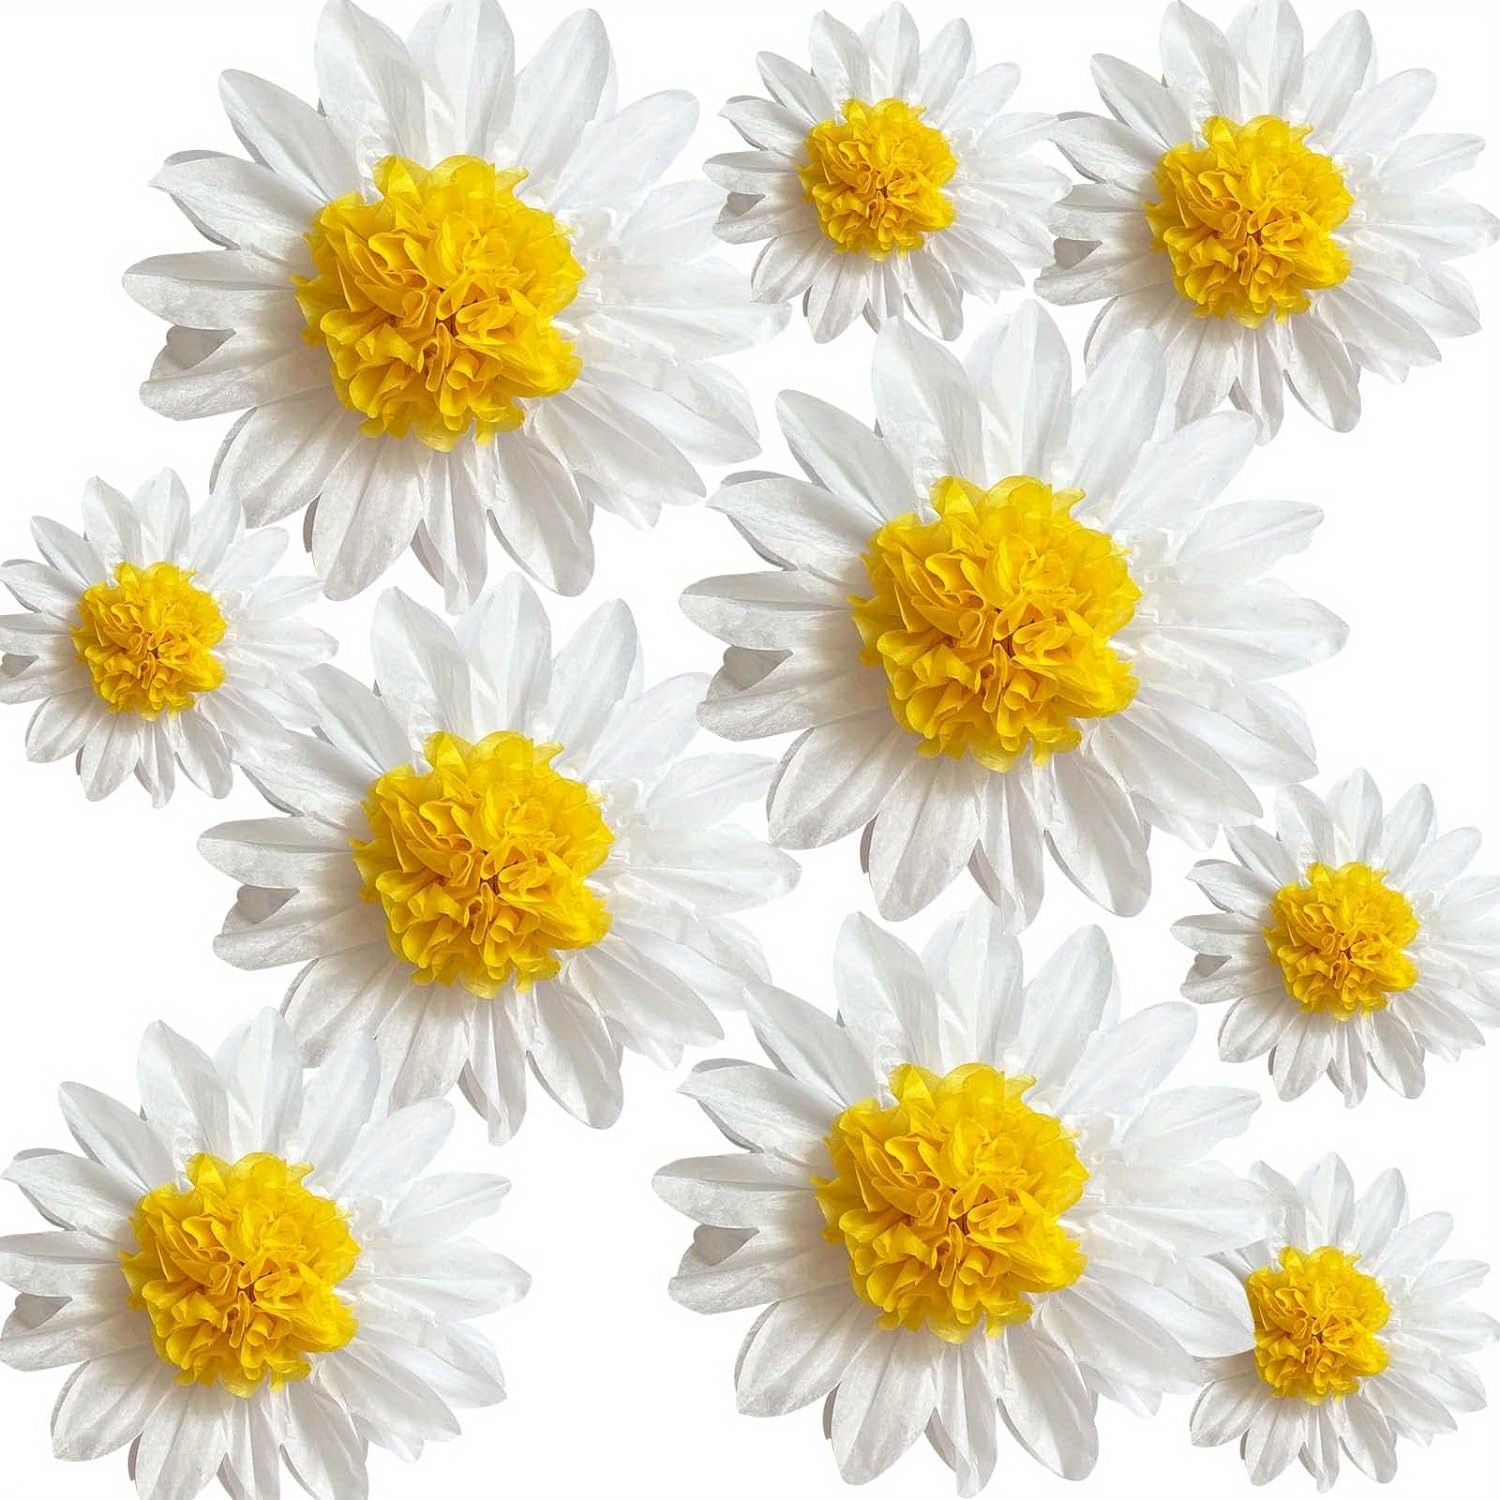 

10-piece Daisy Tissue Paper Pom Poms - White & Yellow Flower Wall Decor For Birthday, Bridal, Wedding, Classroom Parties